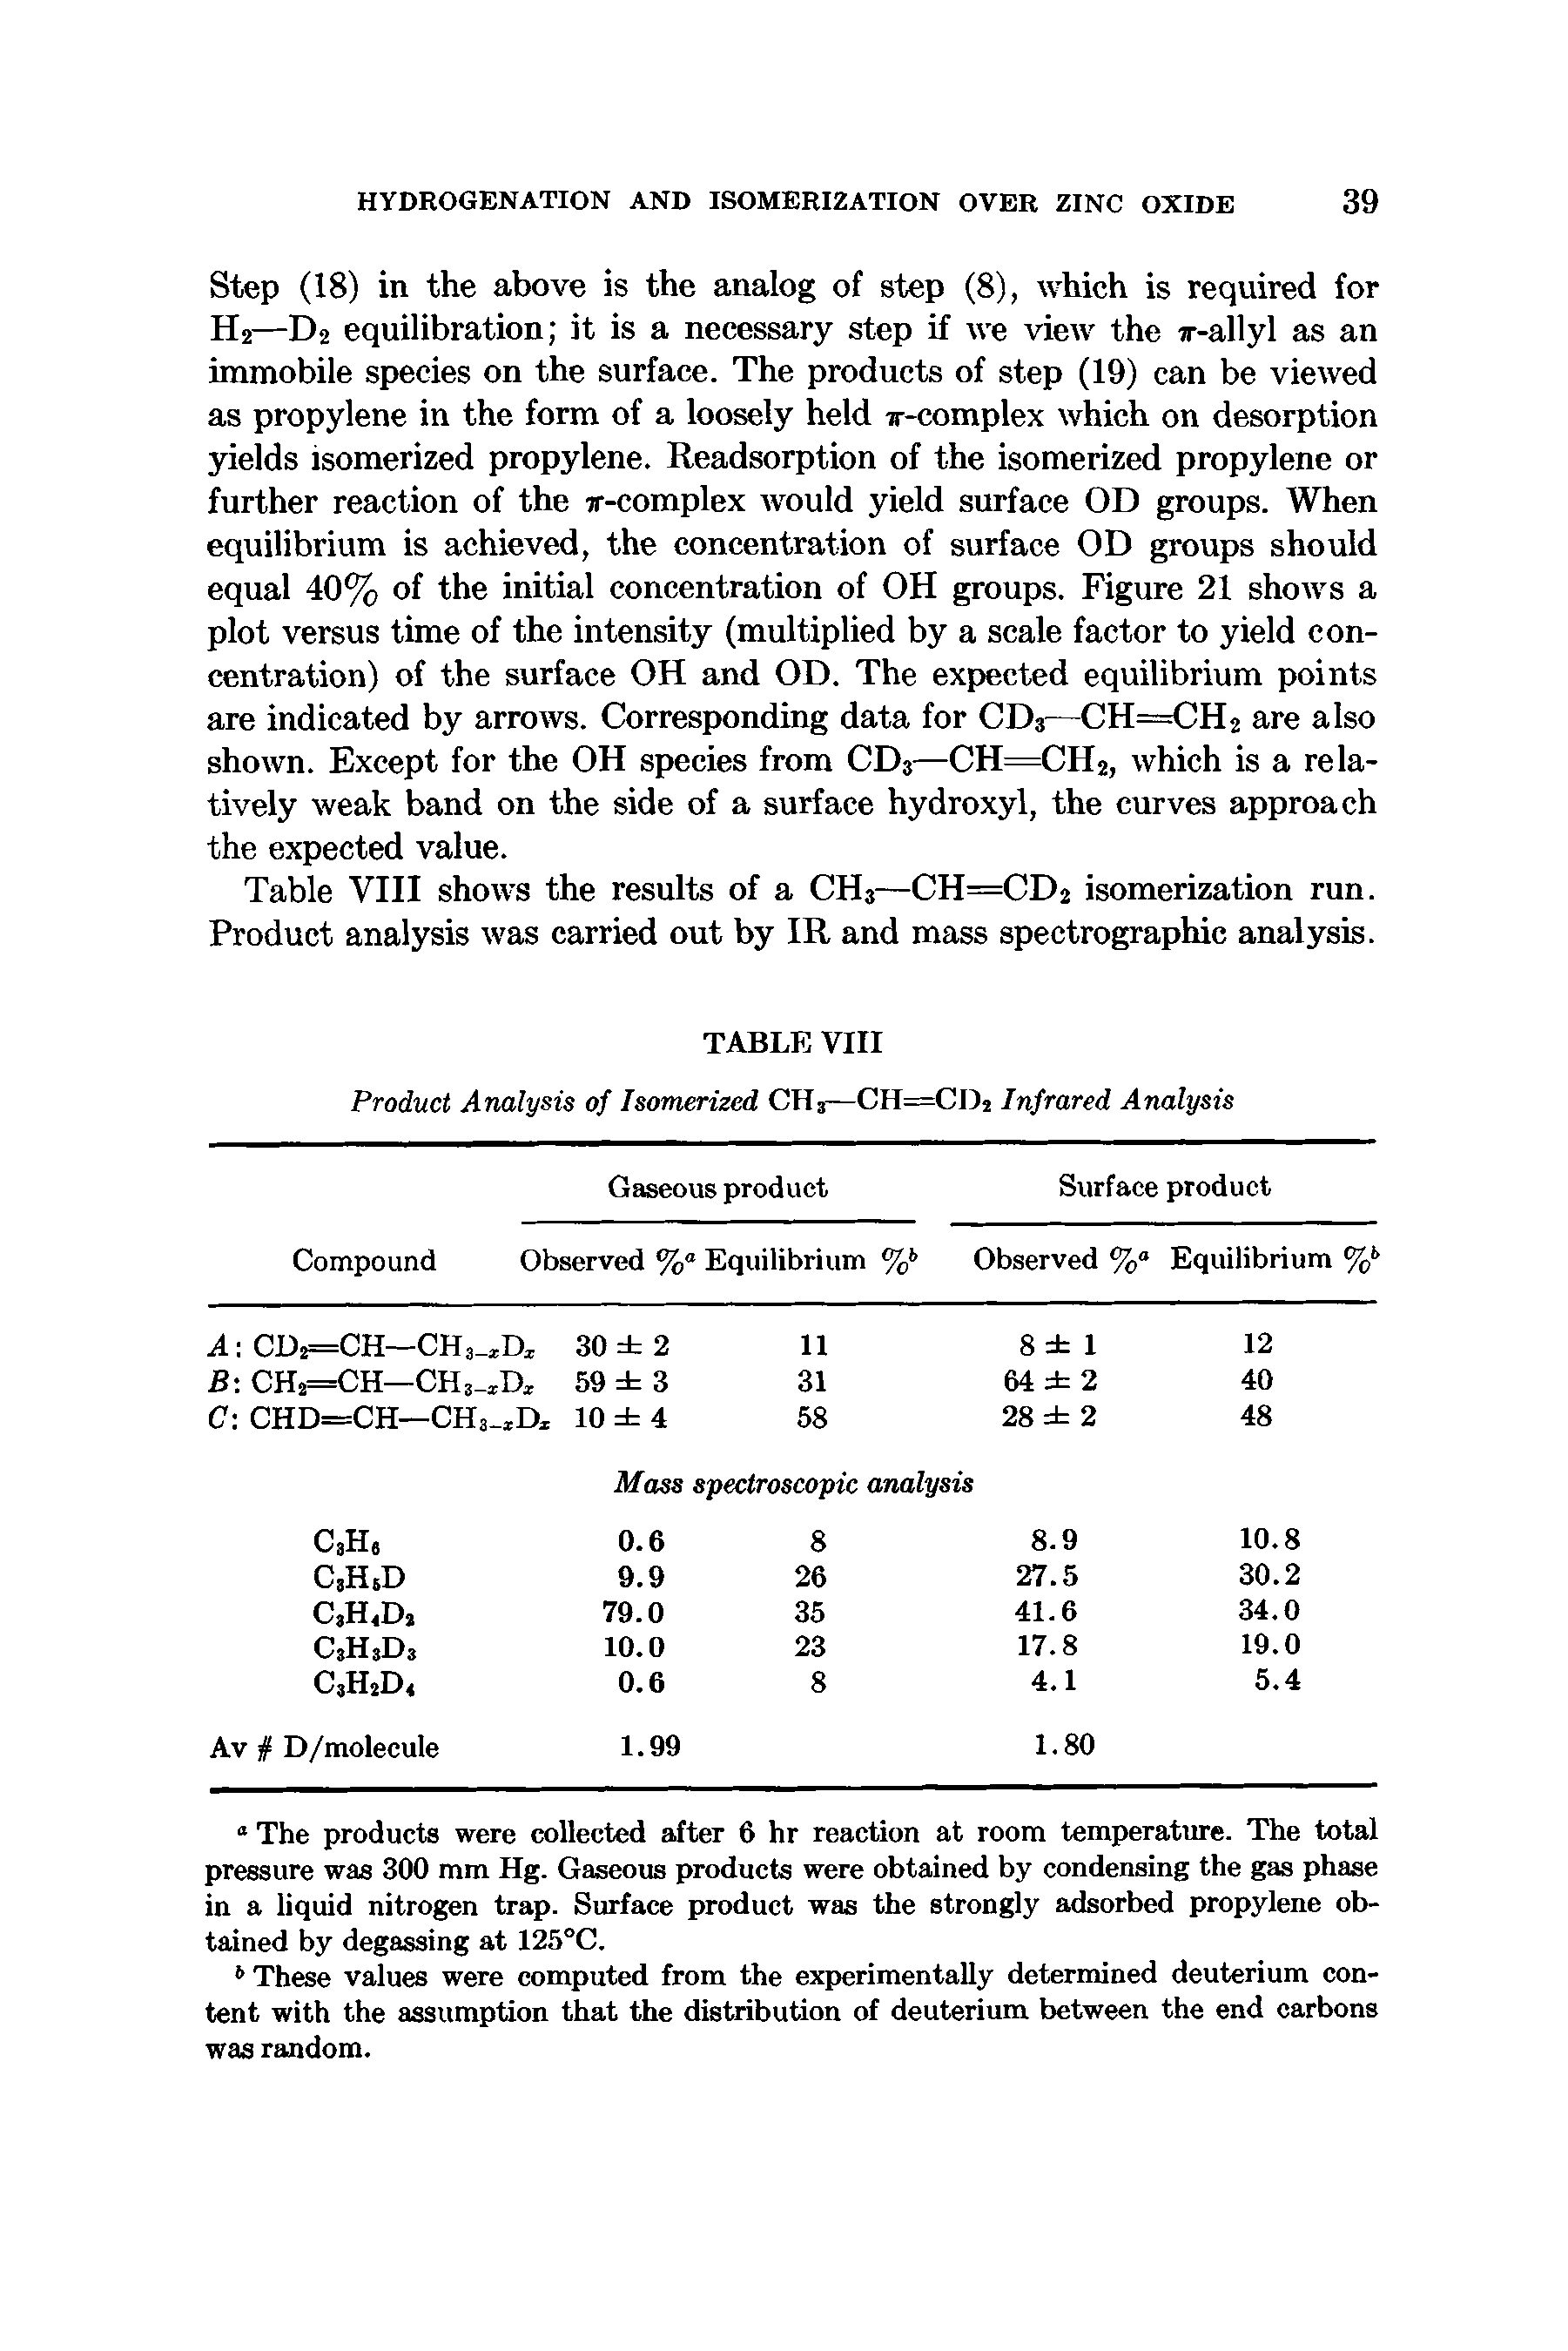 Table VIII shows the results of a CH3—CH=CD2 isomerization run. Product analysis was carried out by IR and mass spectrographic analysis.